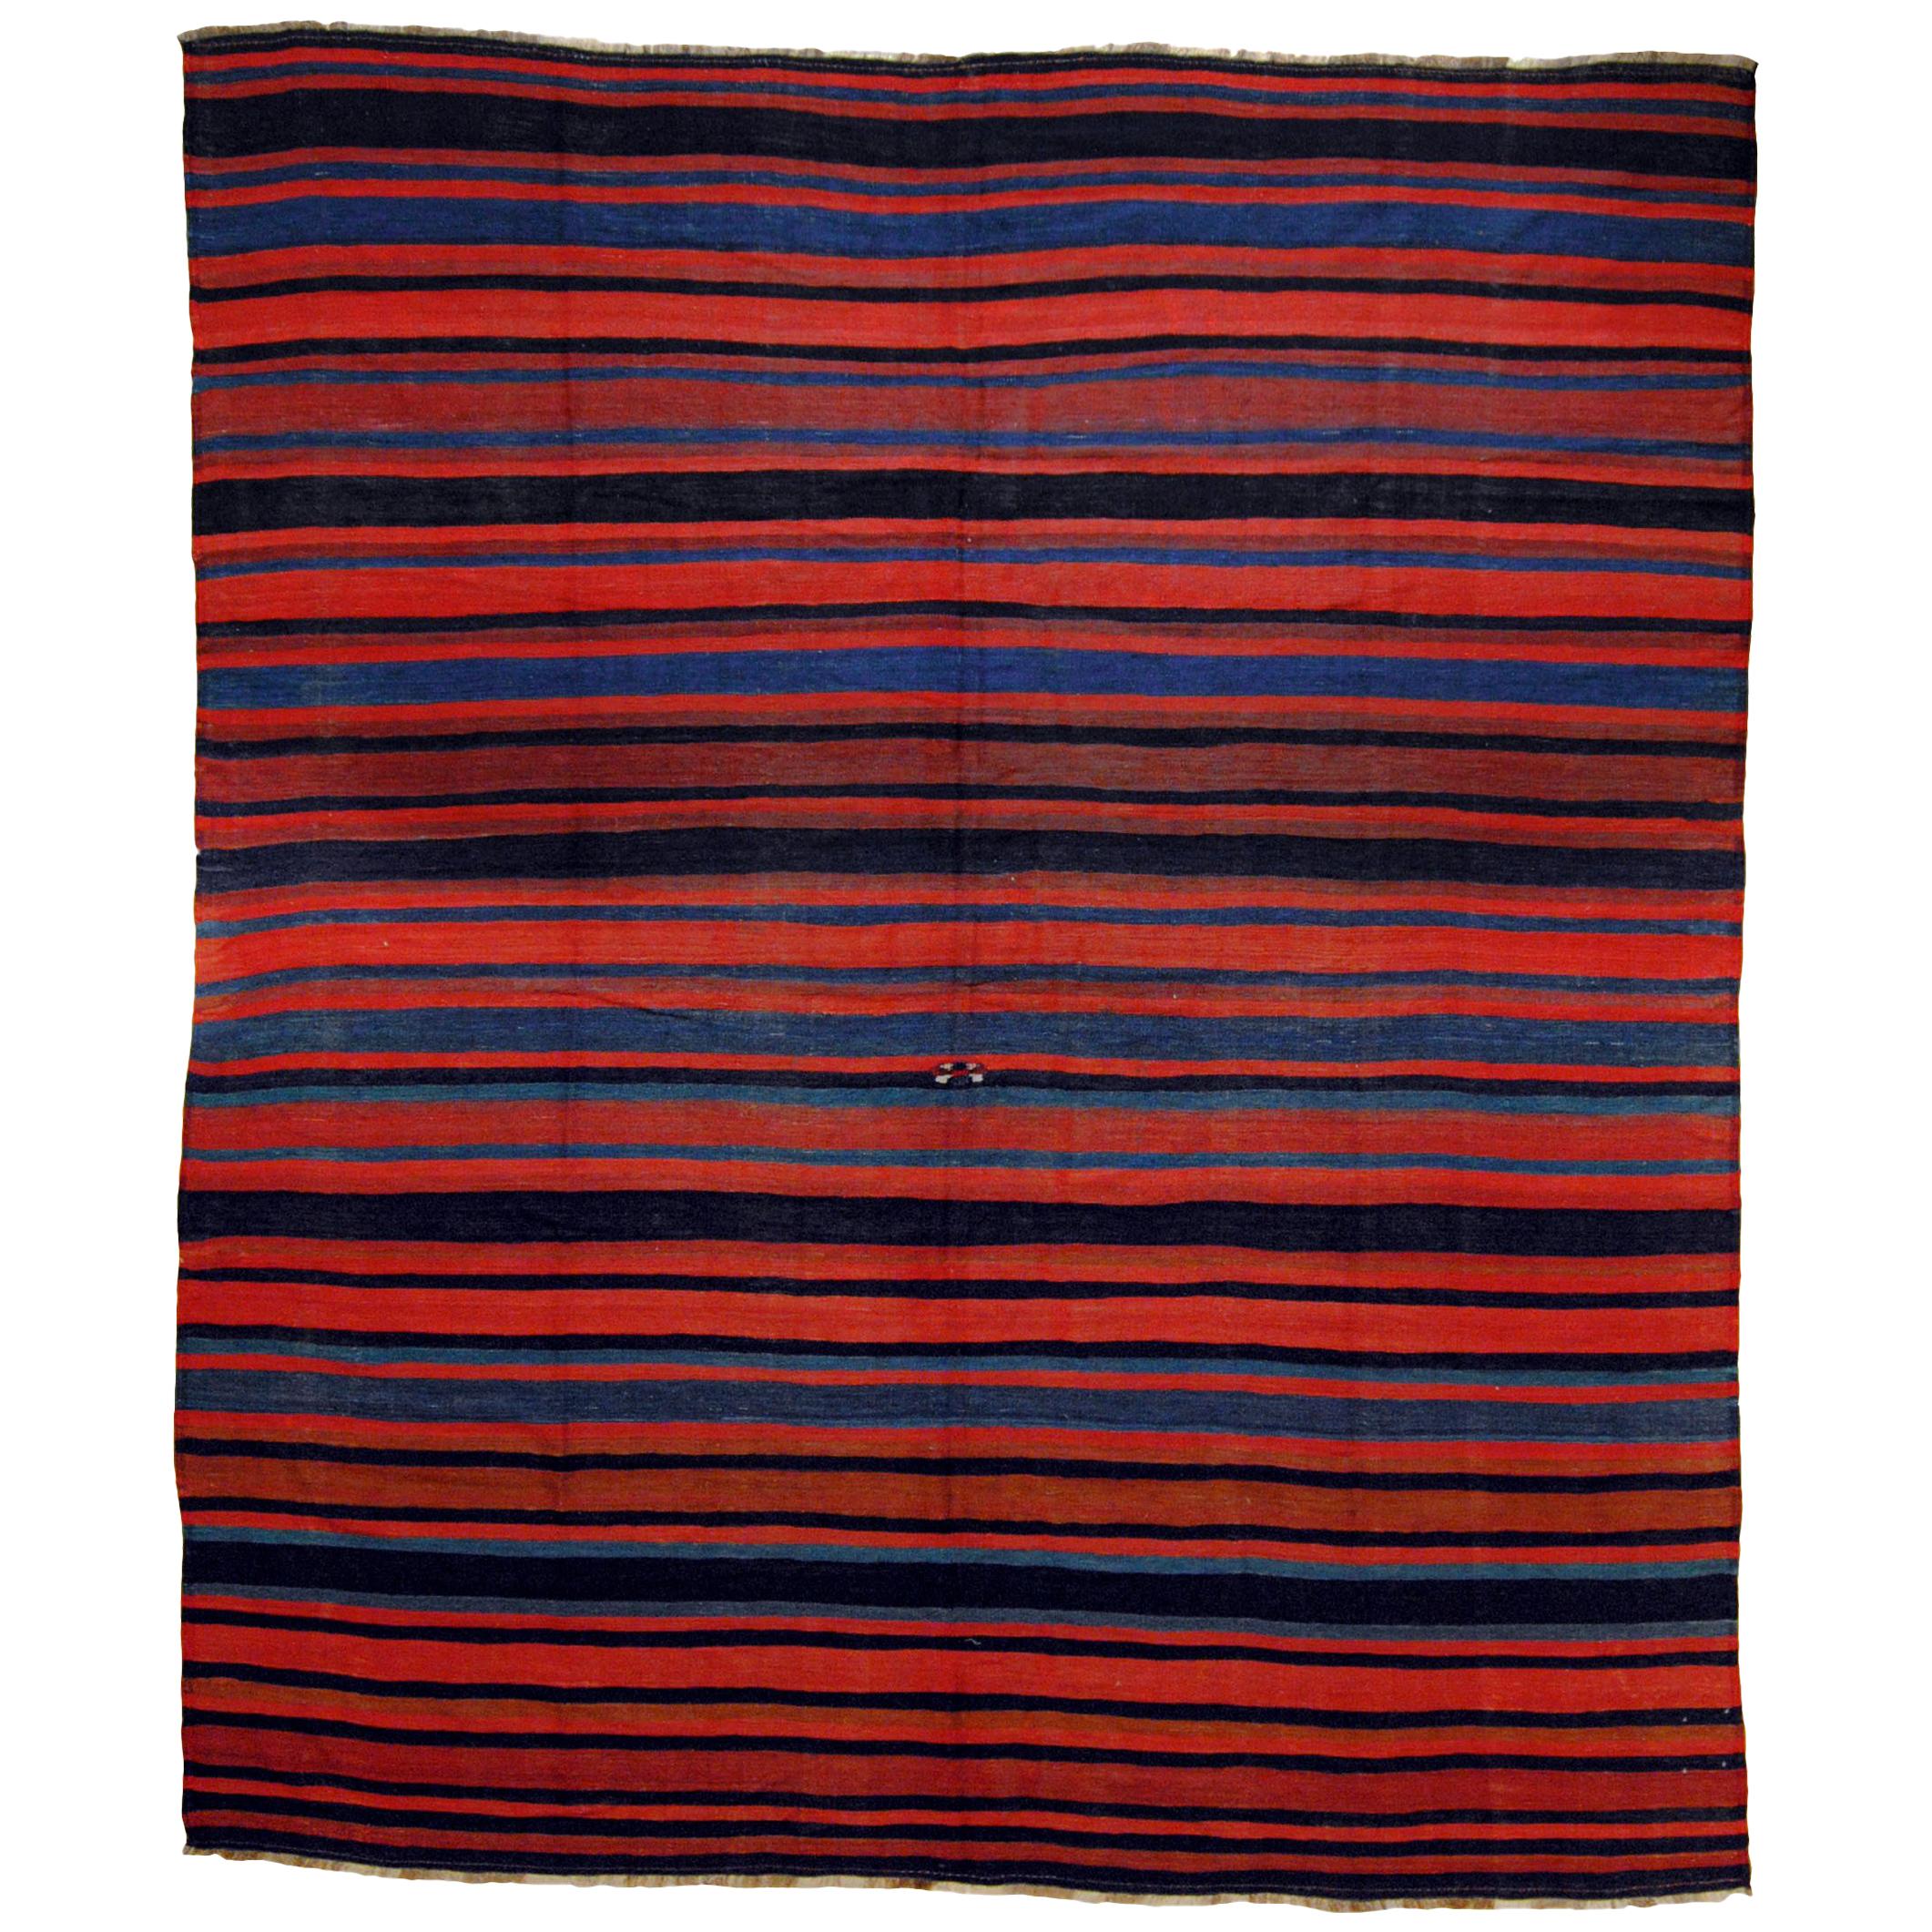 21st Century Red and Blue Nomadic Kurdish Stripes Kilim Rug in Wool, circa 1900s For Sale